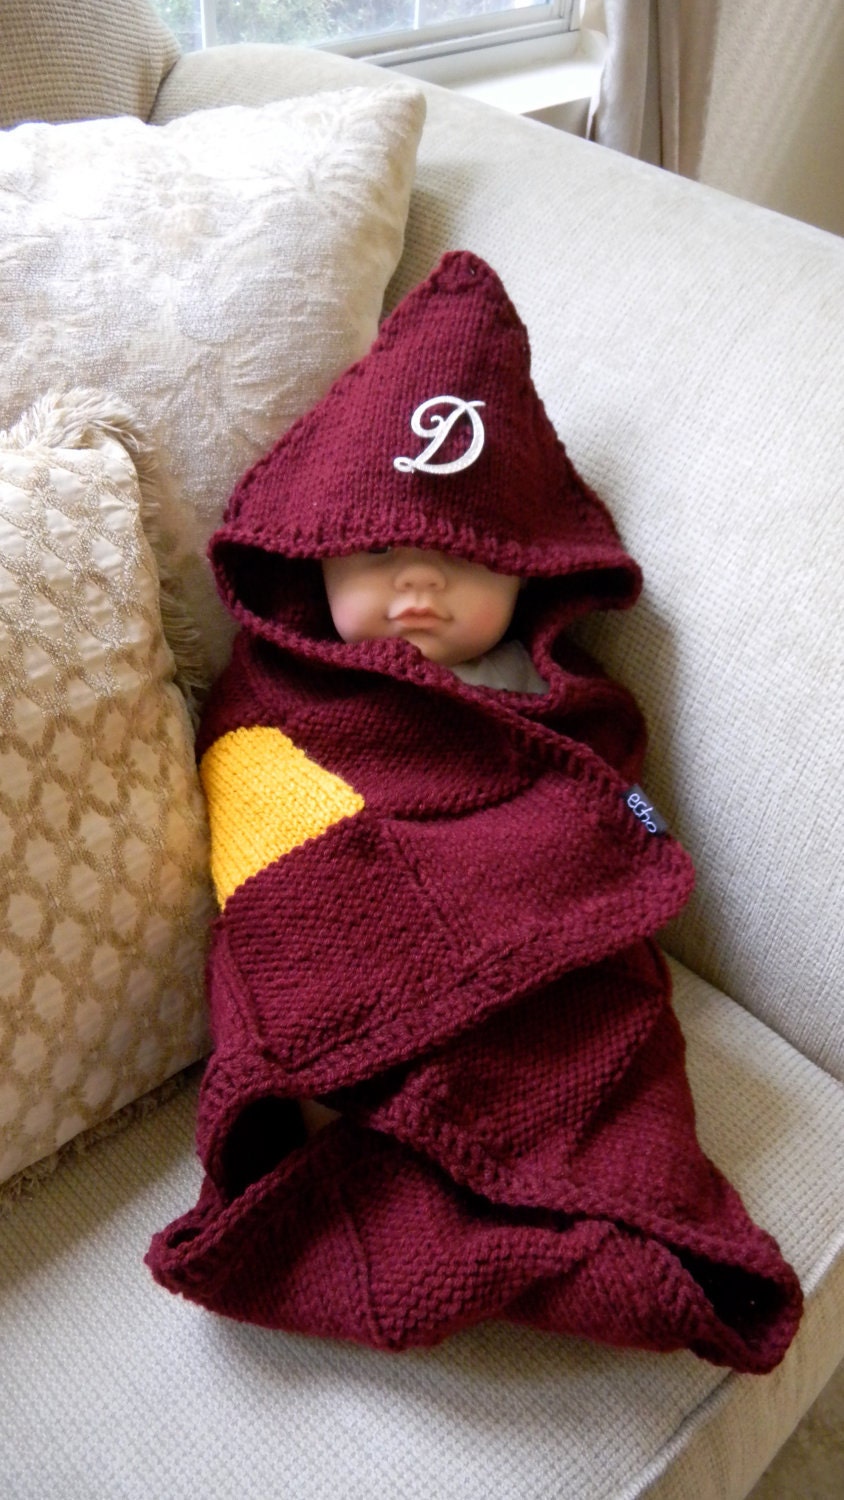 Mrs. Weasley's Knitted Harry Potter Baby Blanket